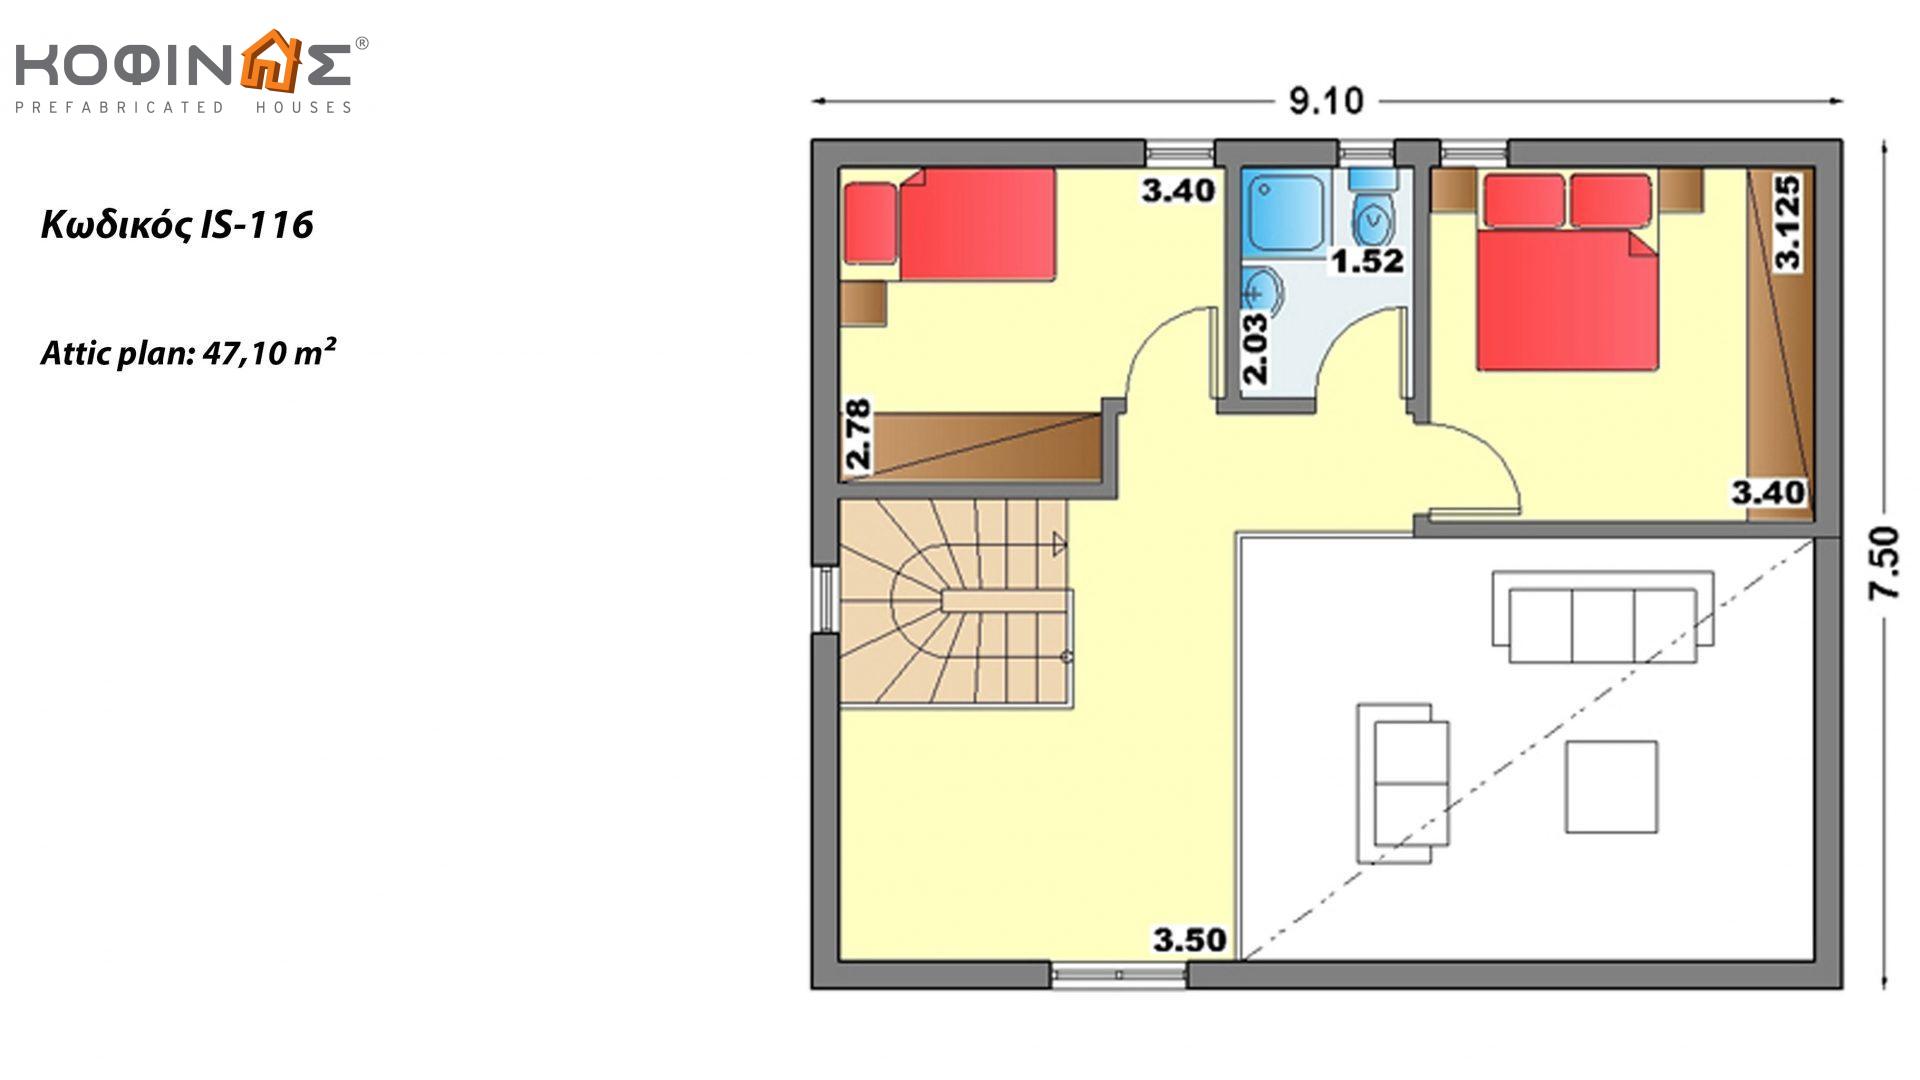 1-story house with attic IS-116, total surface of 116,90 m² ,covered roofed areas 26,70 m²